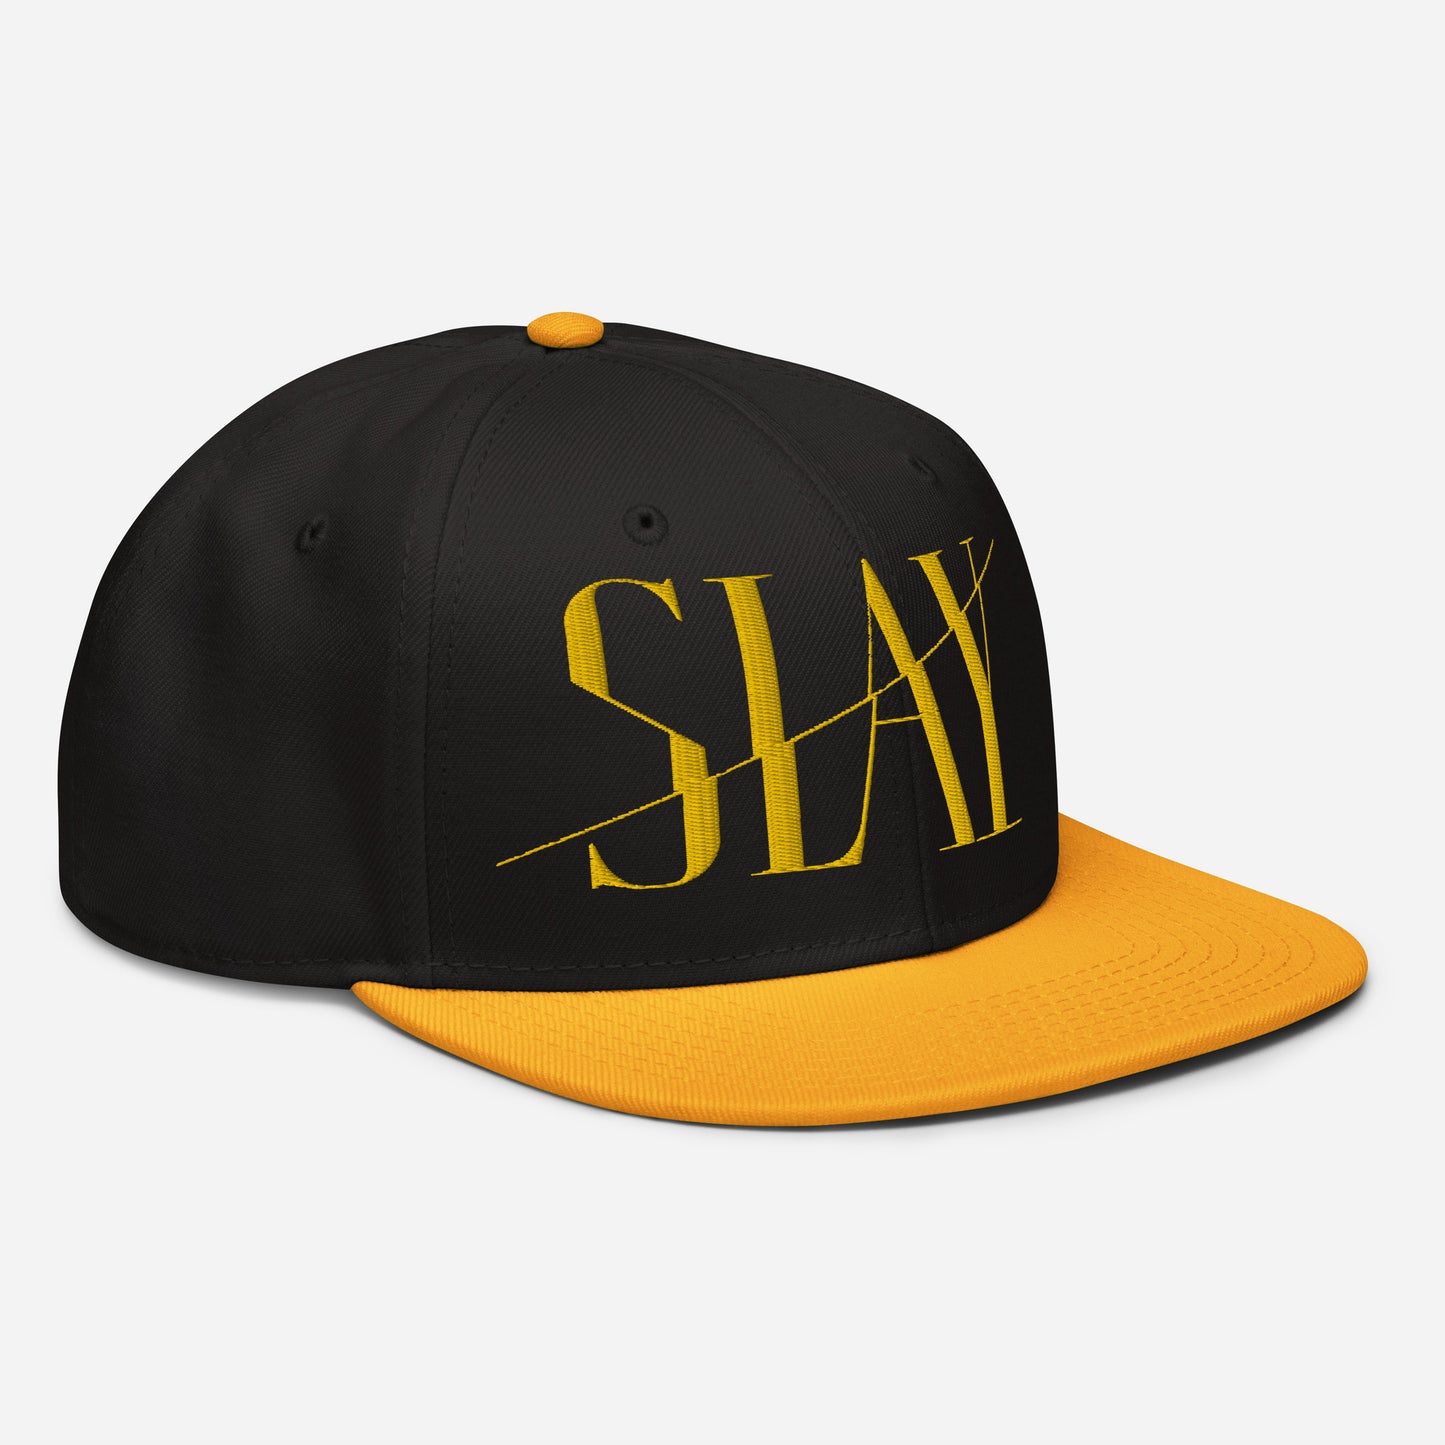 Side view of a black and yellow Snapback Hat with the word "SLAY" embroidered on the front.